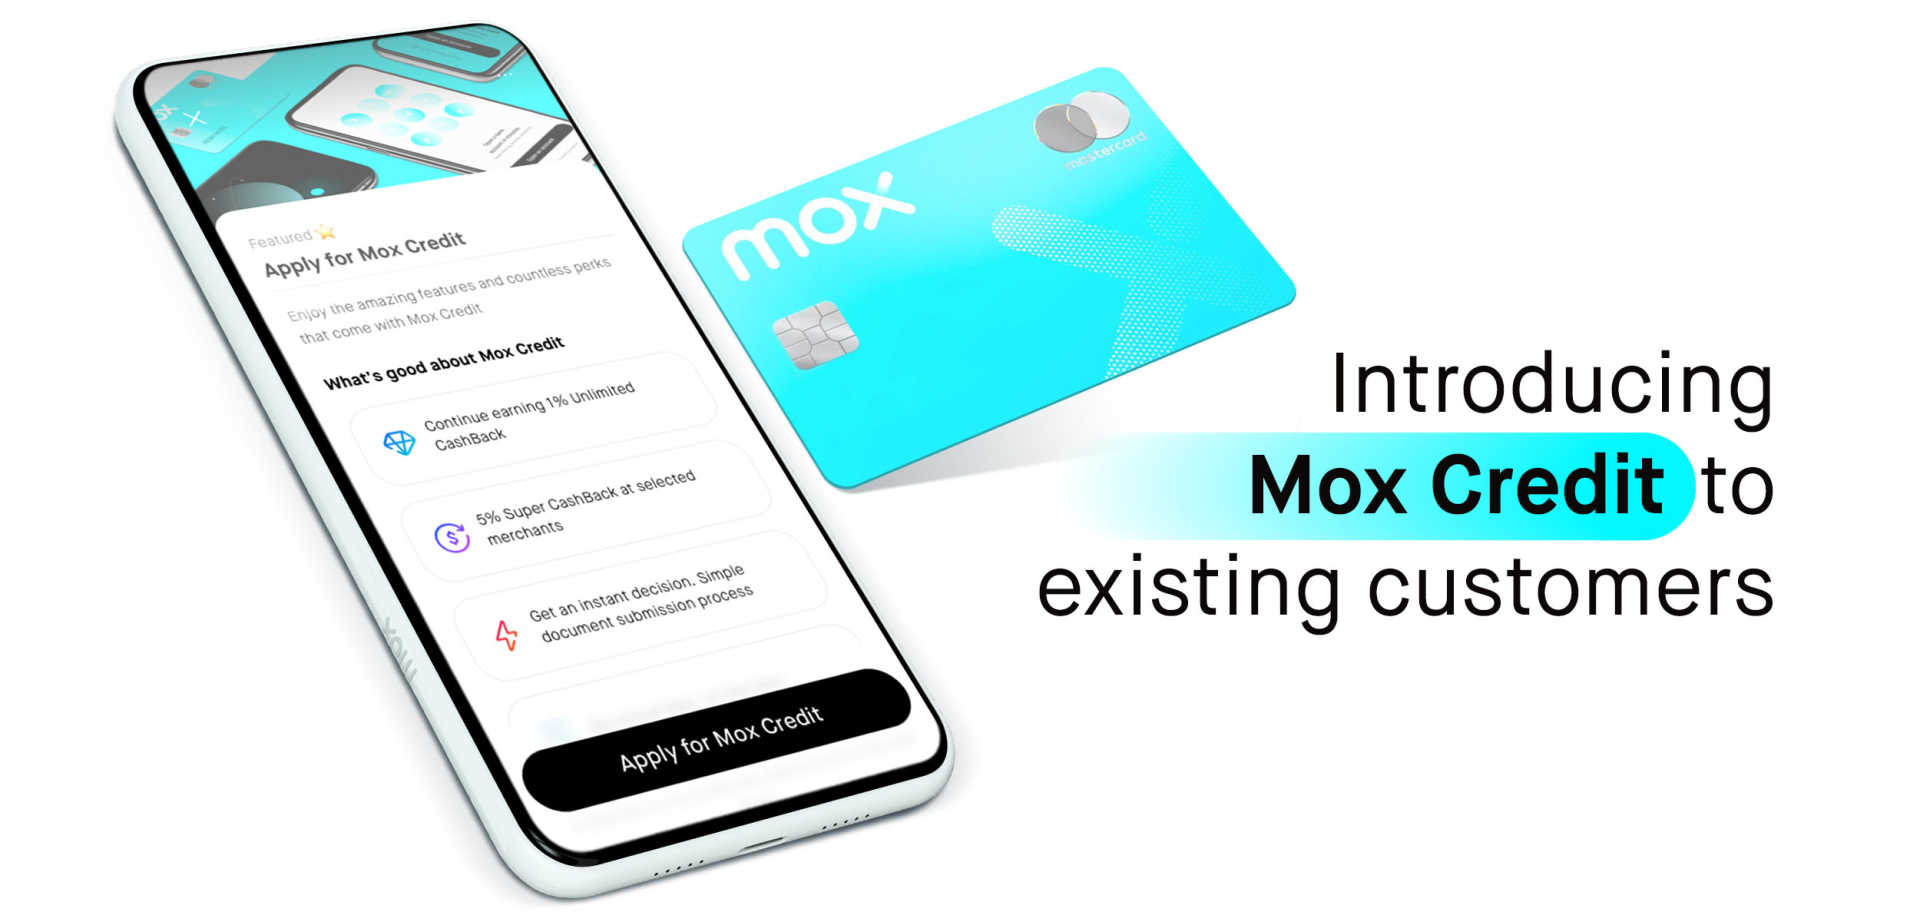 Introducing the ‘Mox Card with credit’ to existing customers